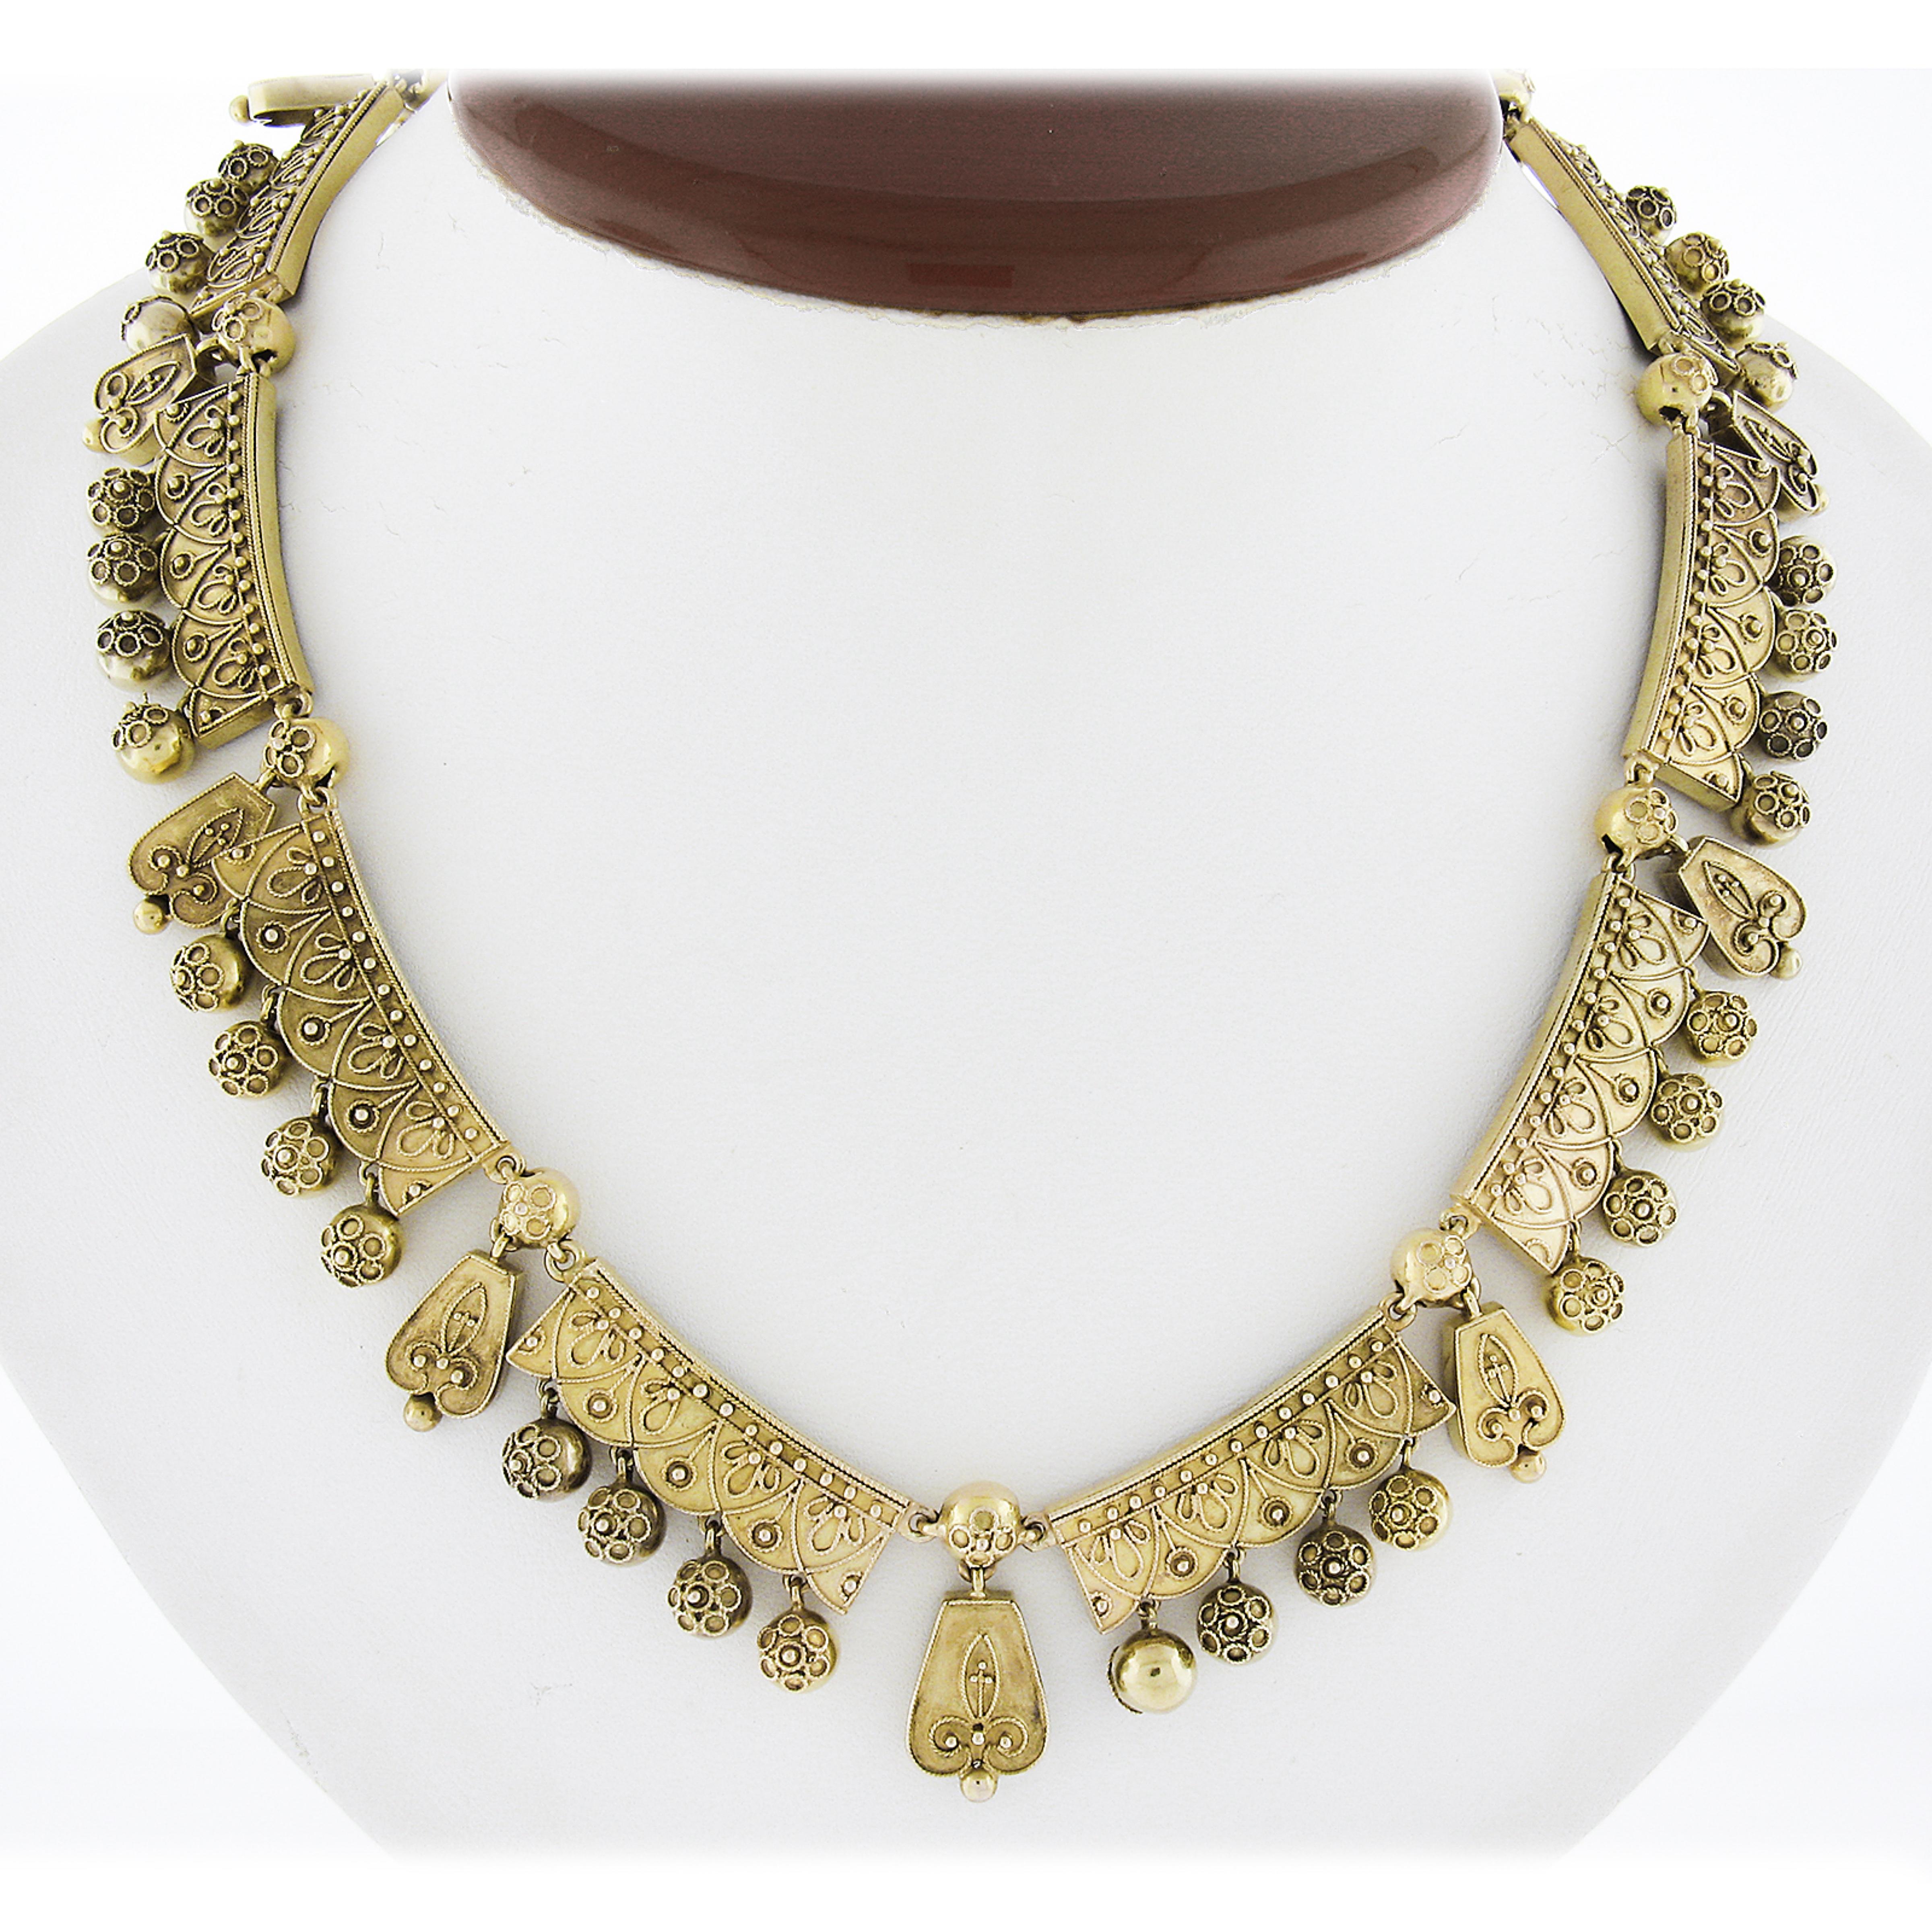 Magnificent and rare Etruscan Revival Necklace. This necklace features Cannetille wire and beading work throughout. It has a swivel bail on the center front link giving the ability to hang your favorite pendant or whatever your heart desires! To